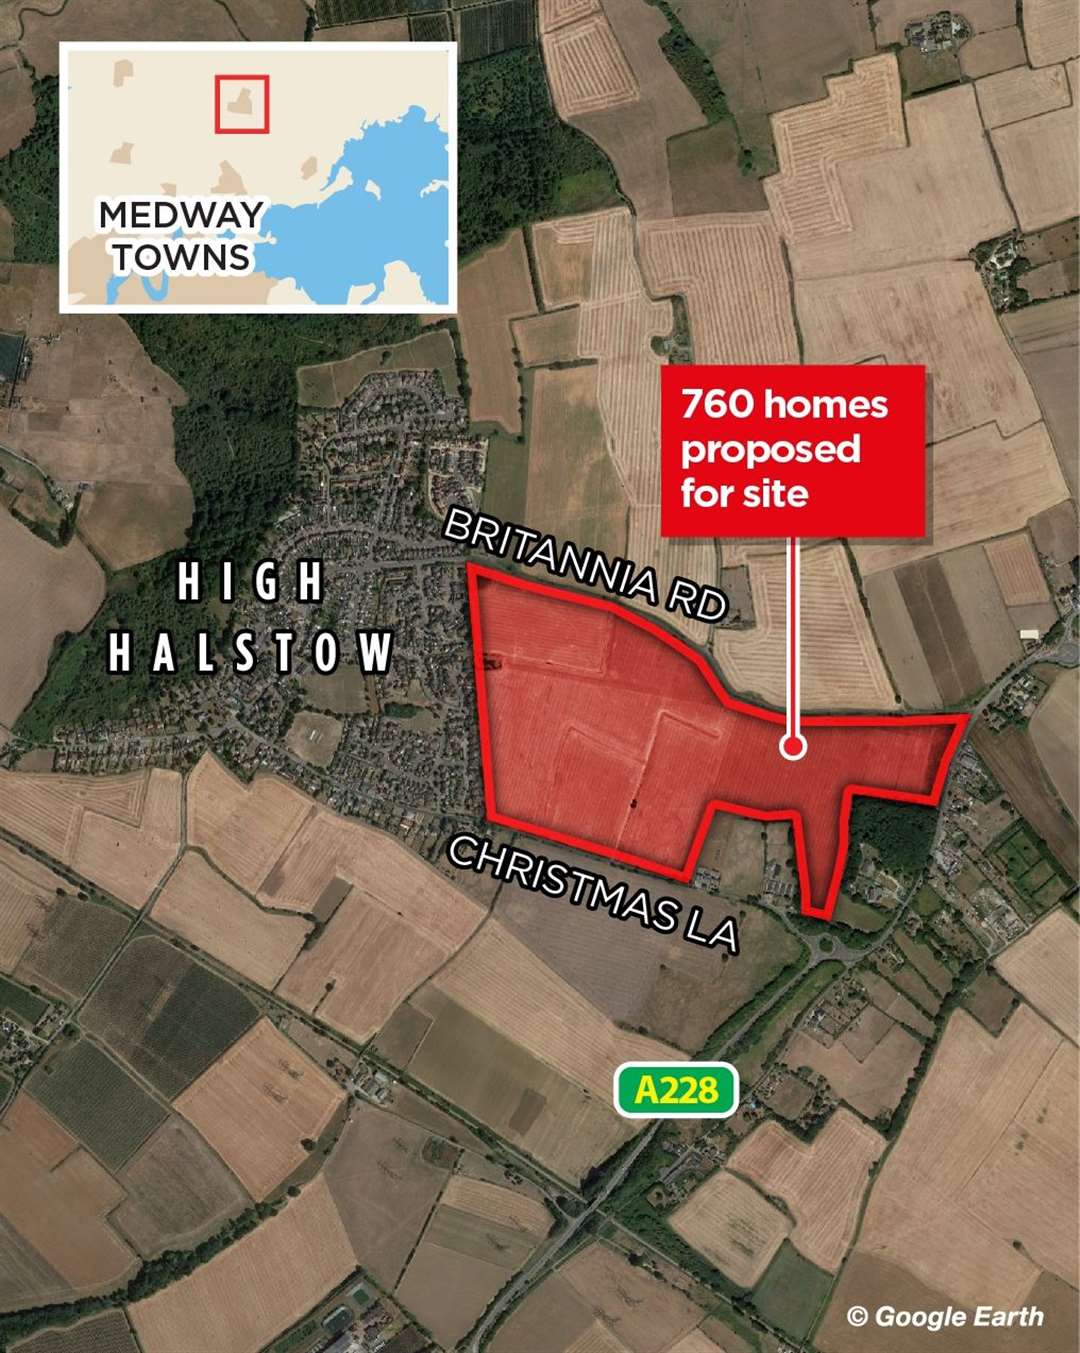 The 760 new homes proposed by Redrow would be built on the land between Sharnal Street, Christmas Lane and Britannia Road in High Halstow